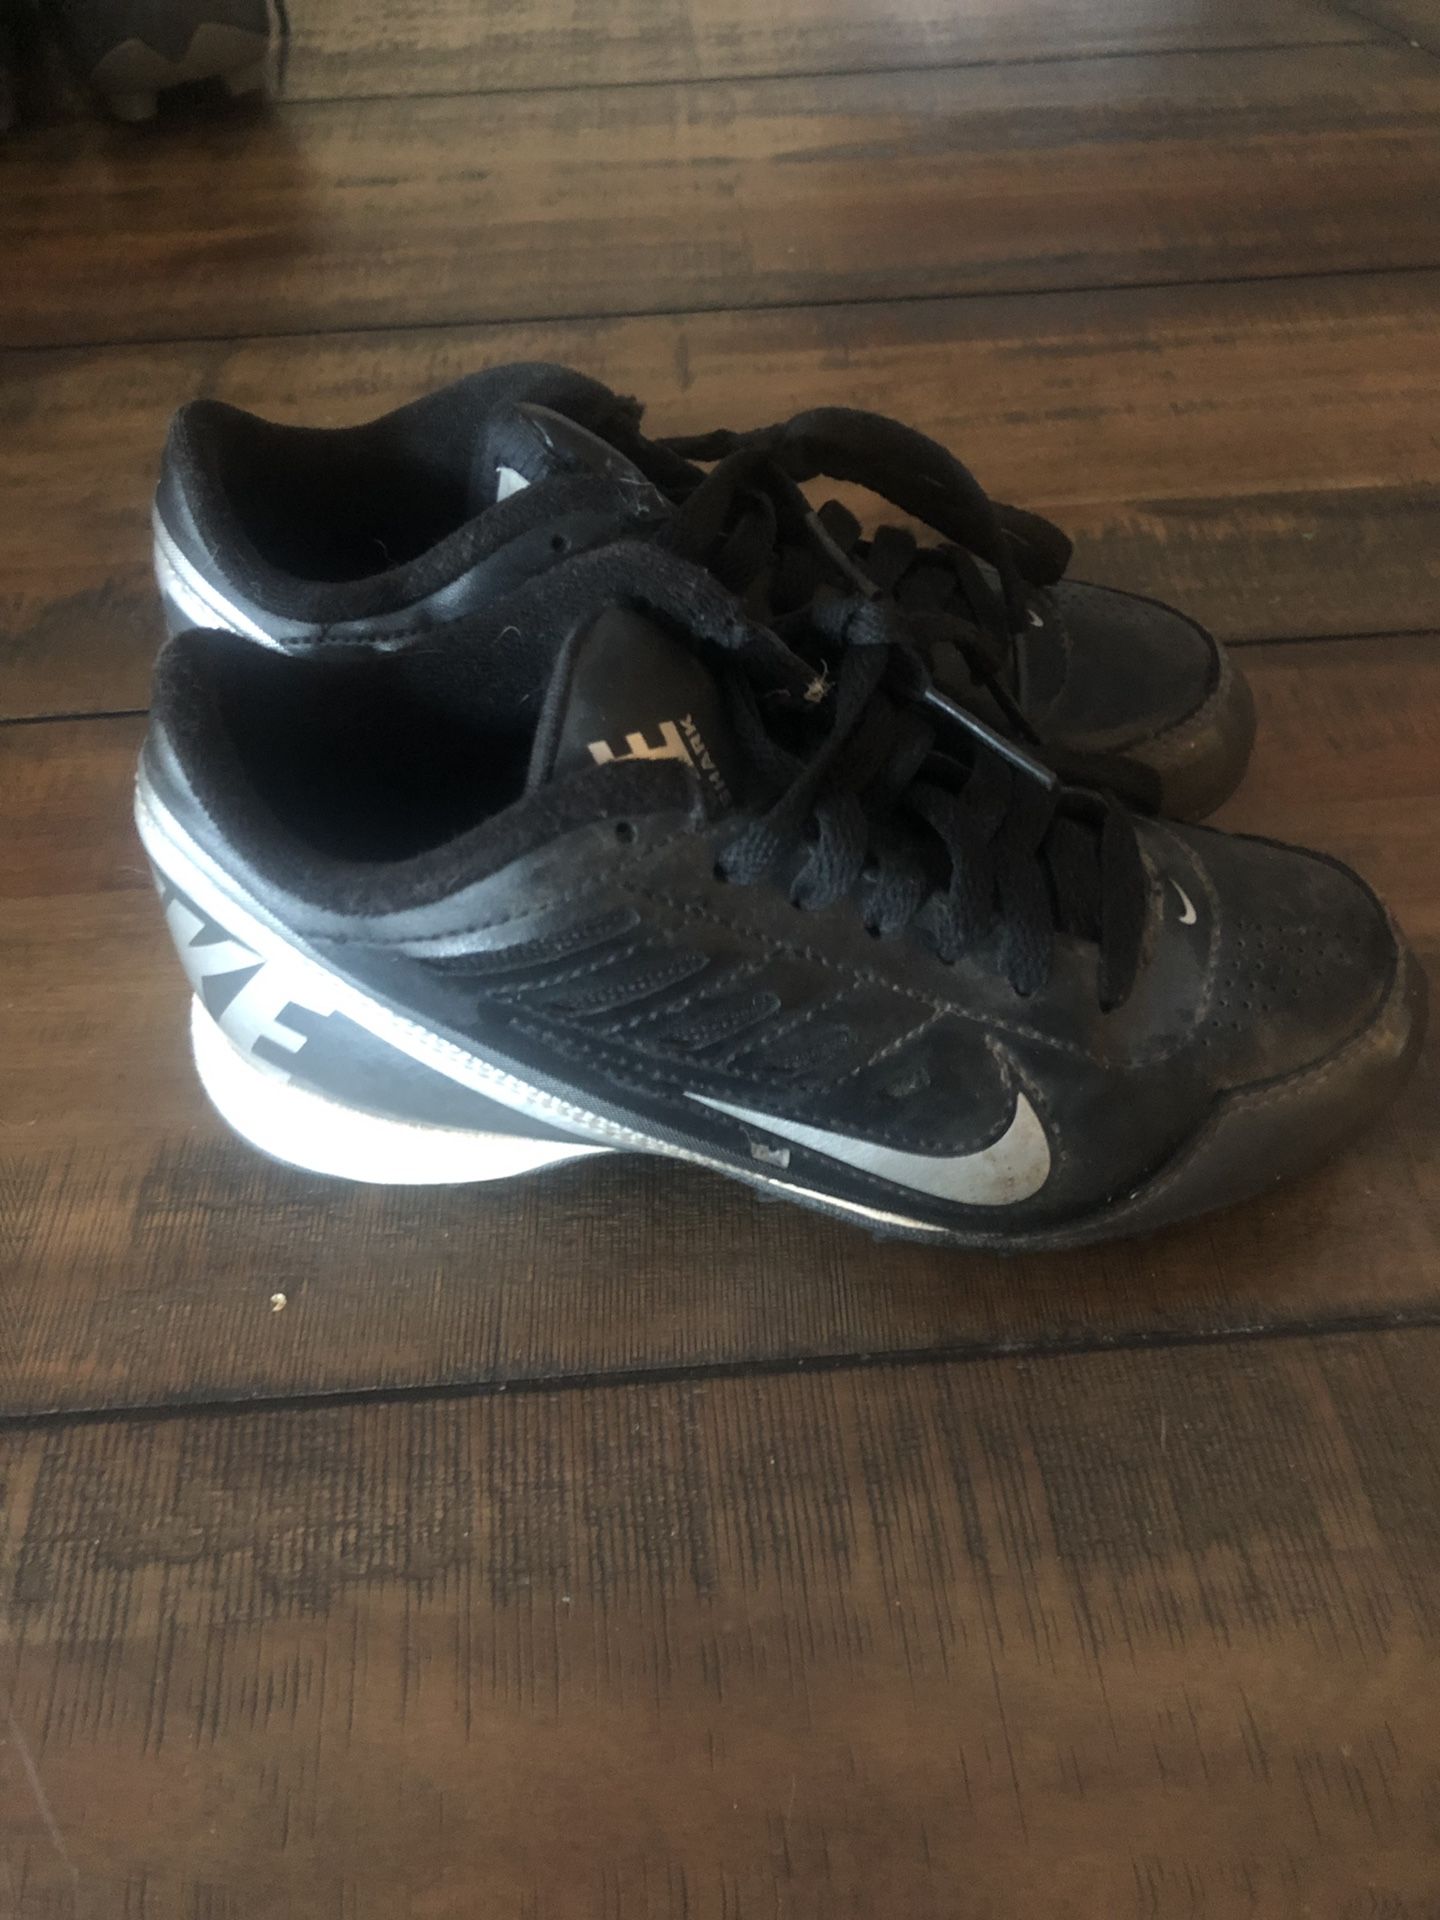 Cleats - Youth Size 1